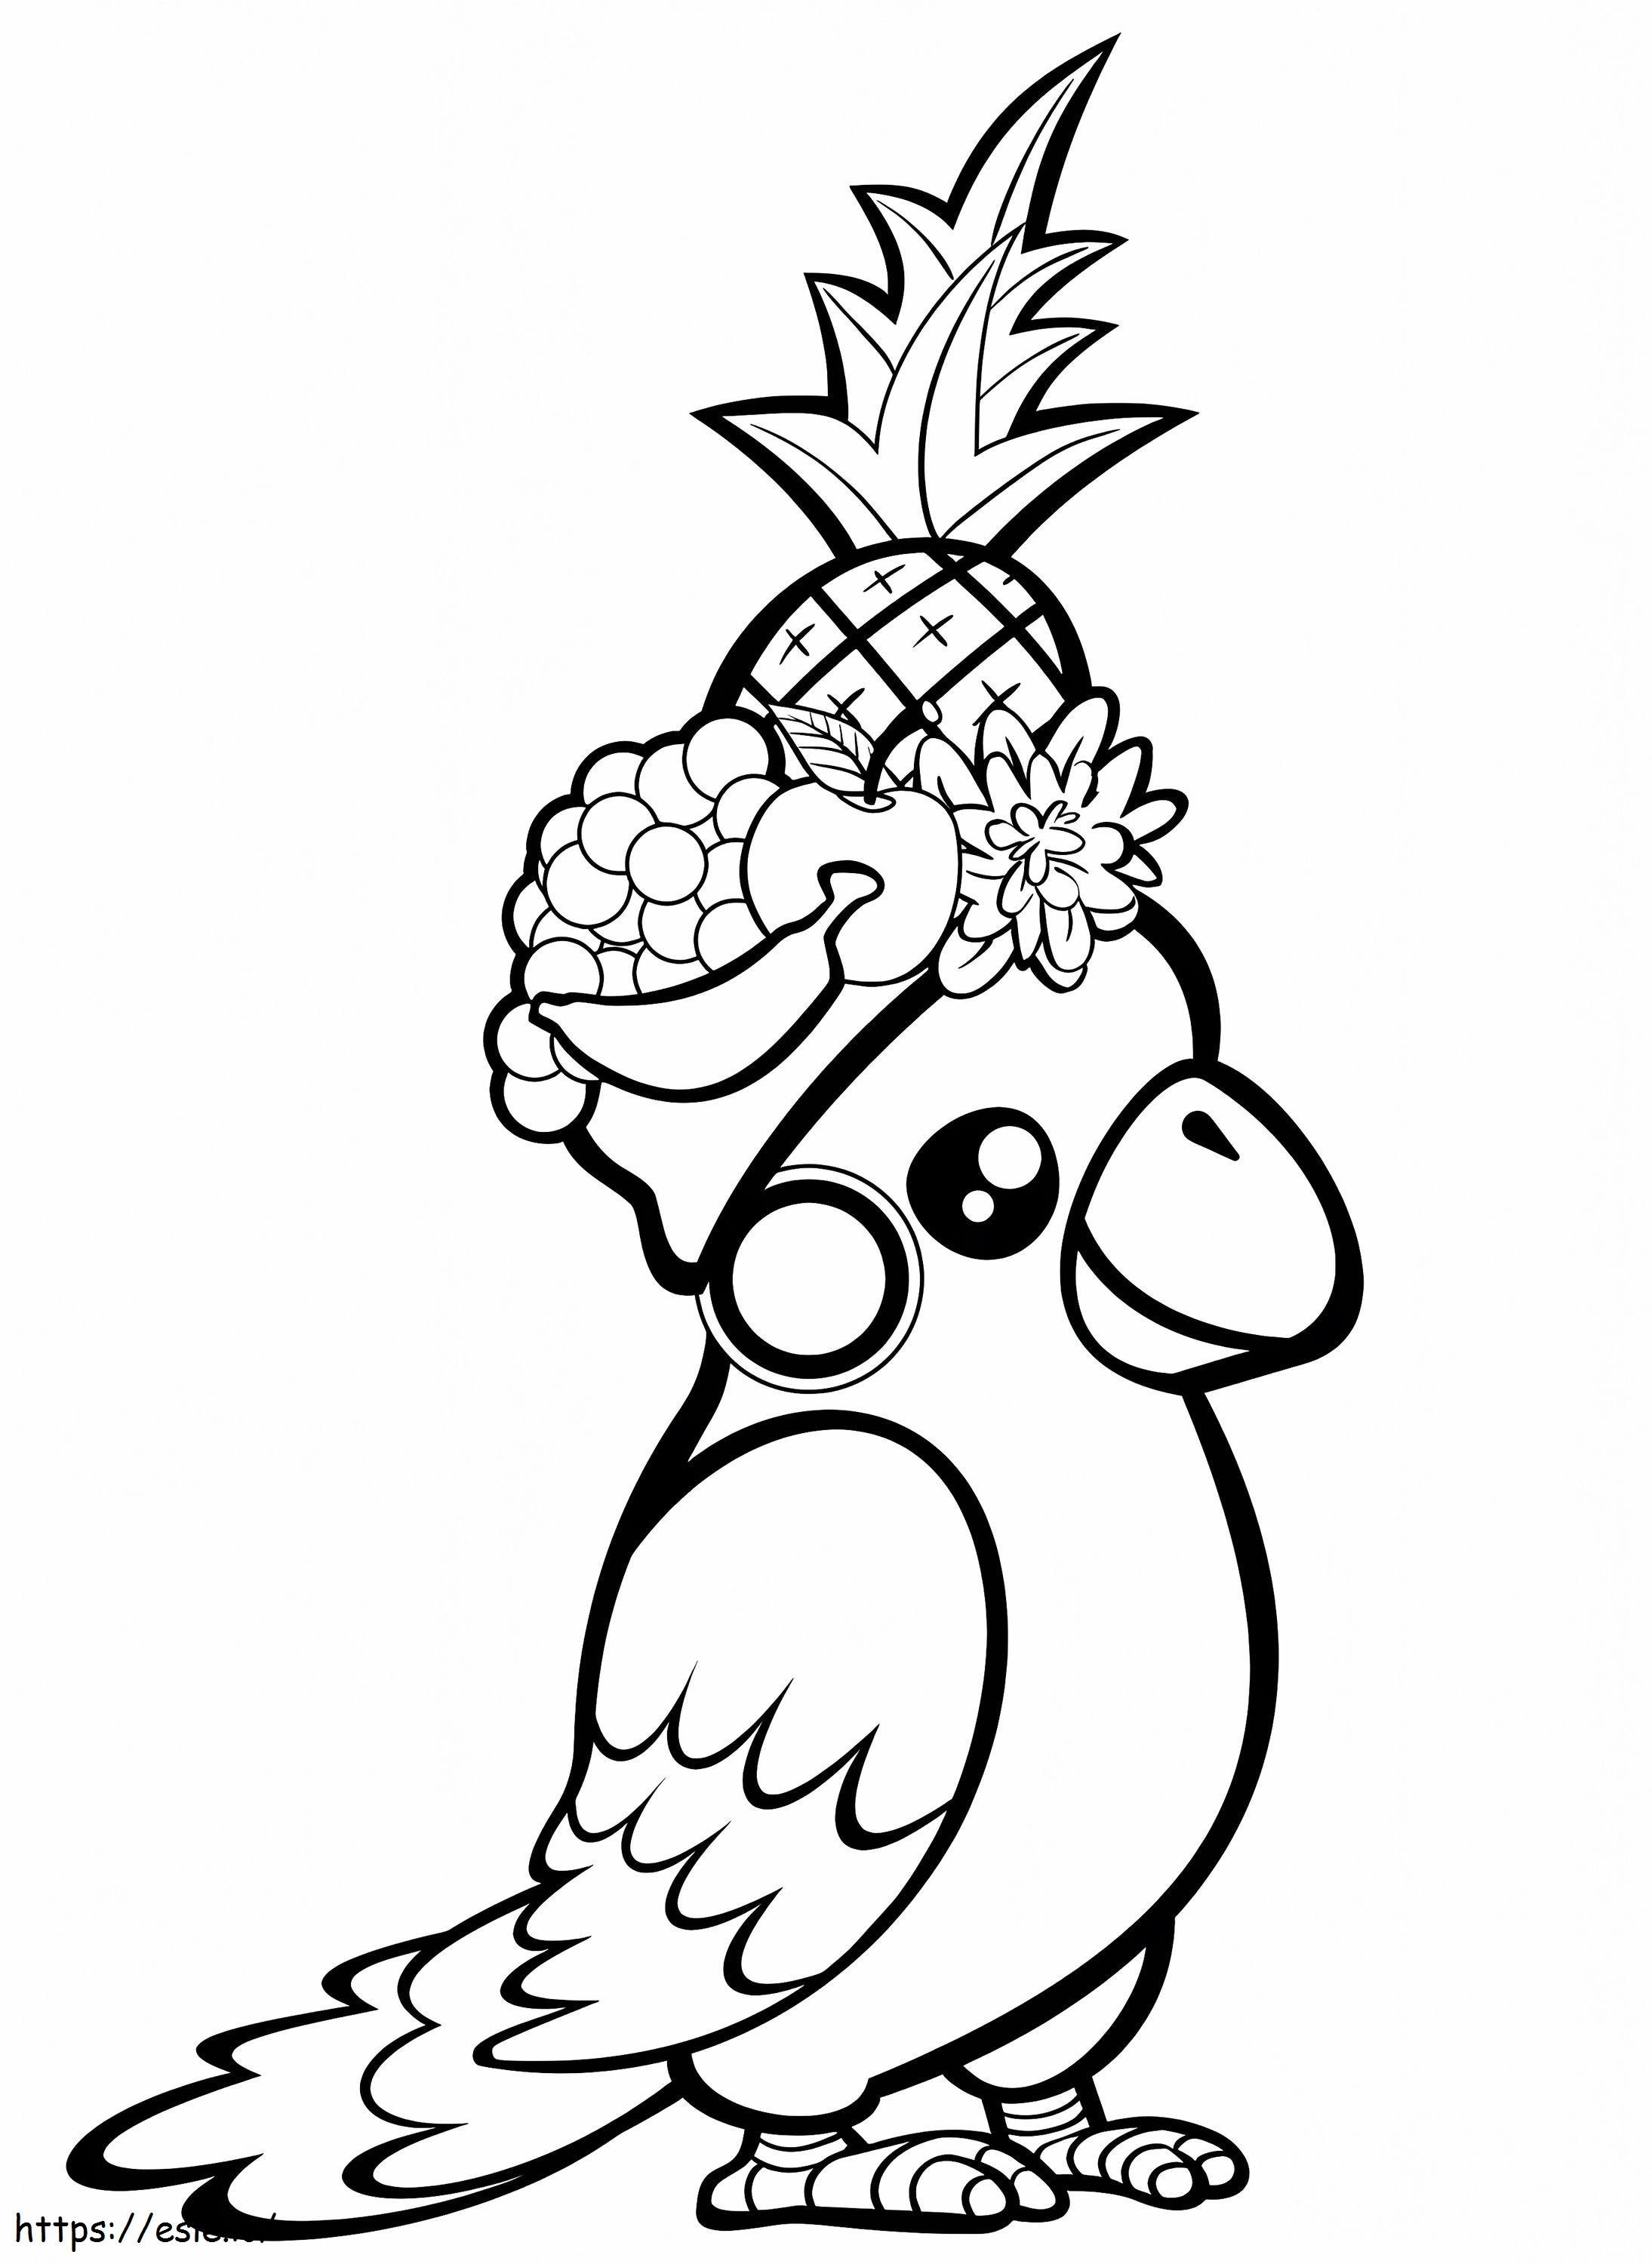 1560412454 Parrot And Fruits A4 coloring page